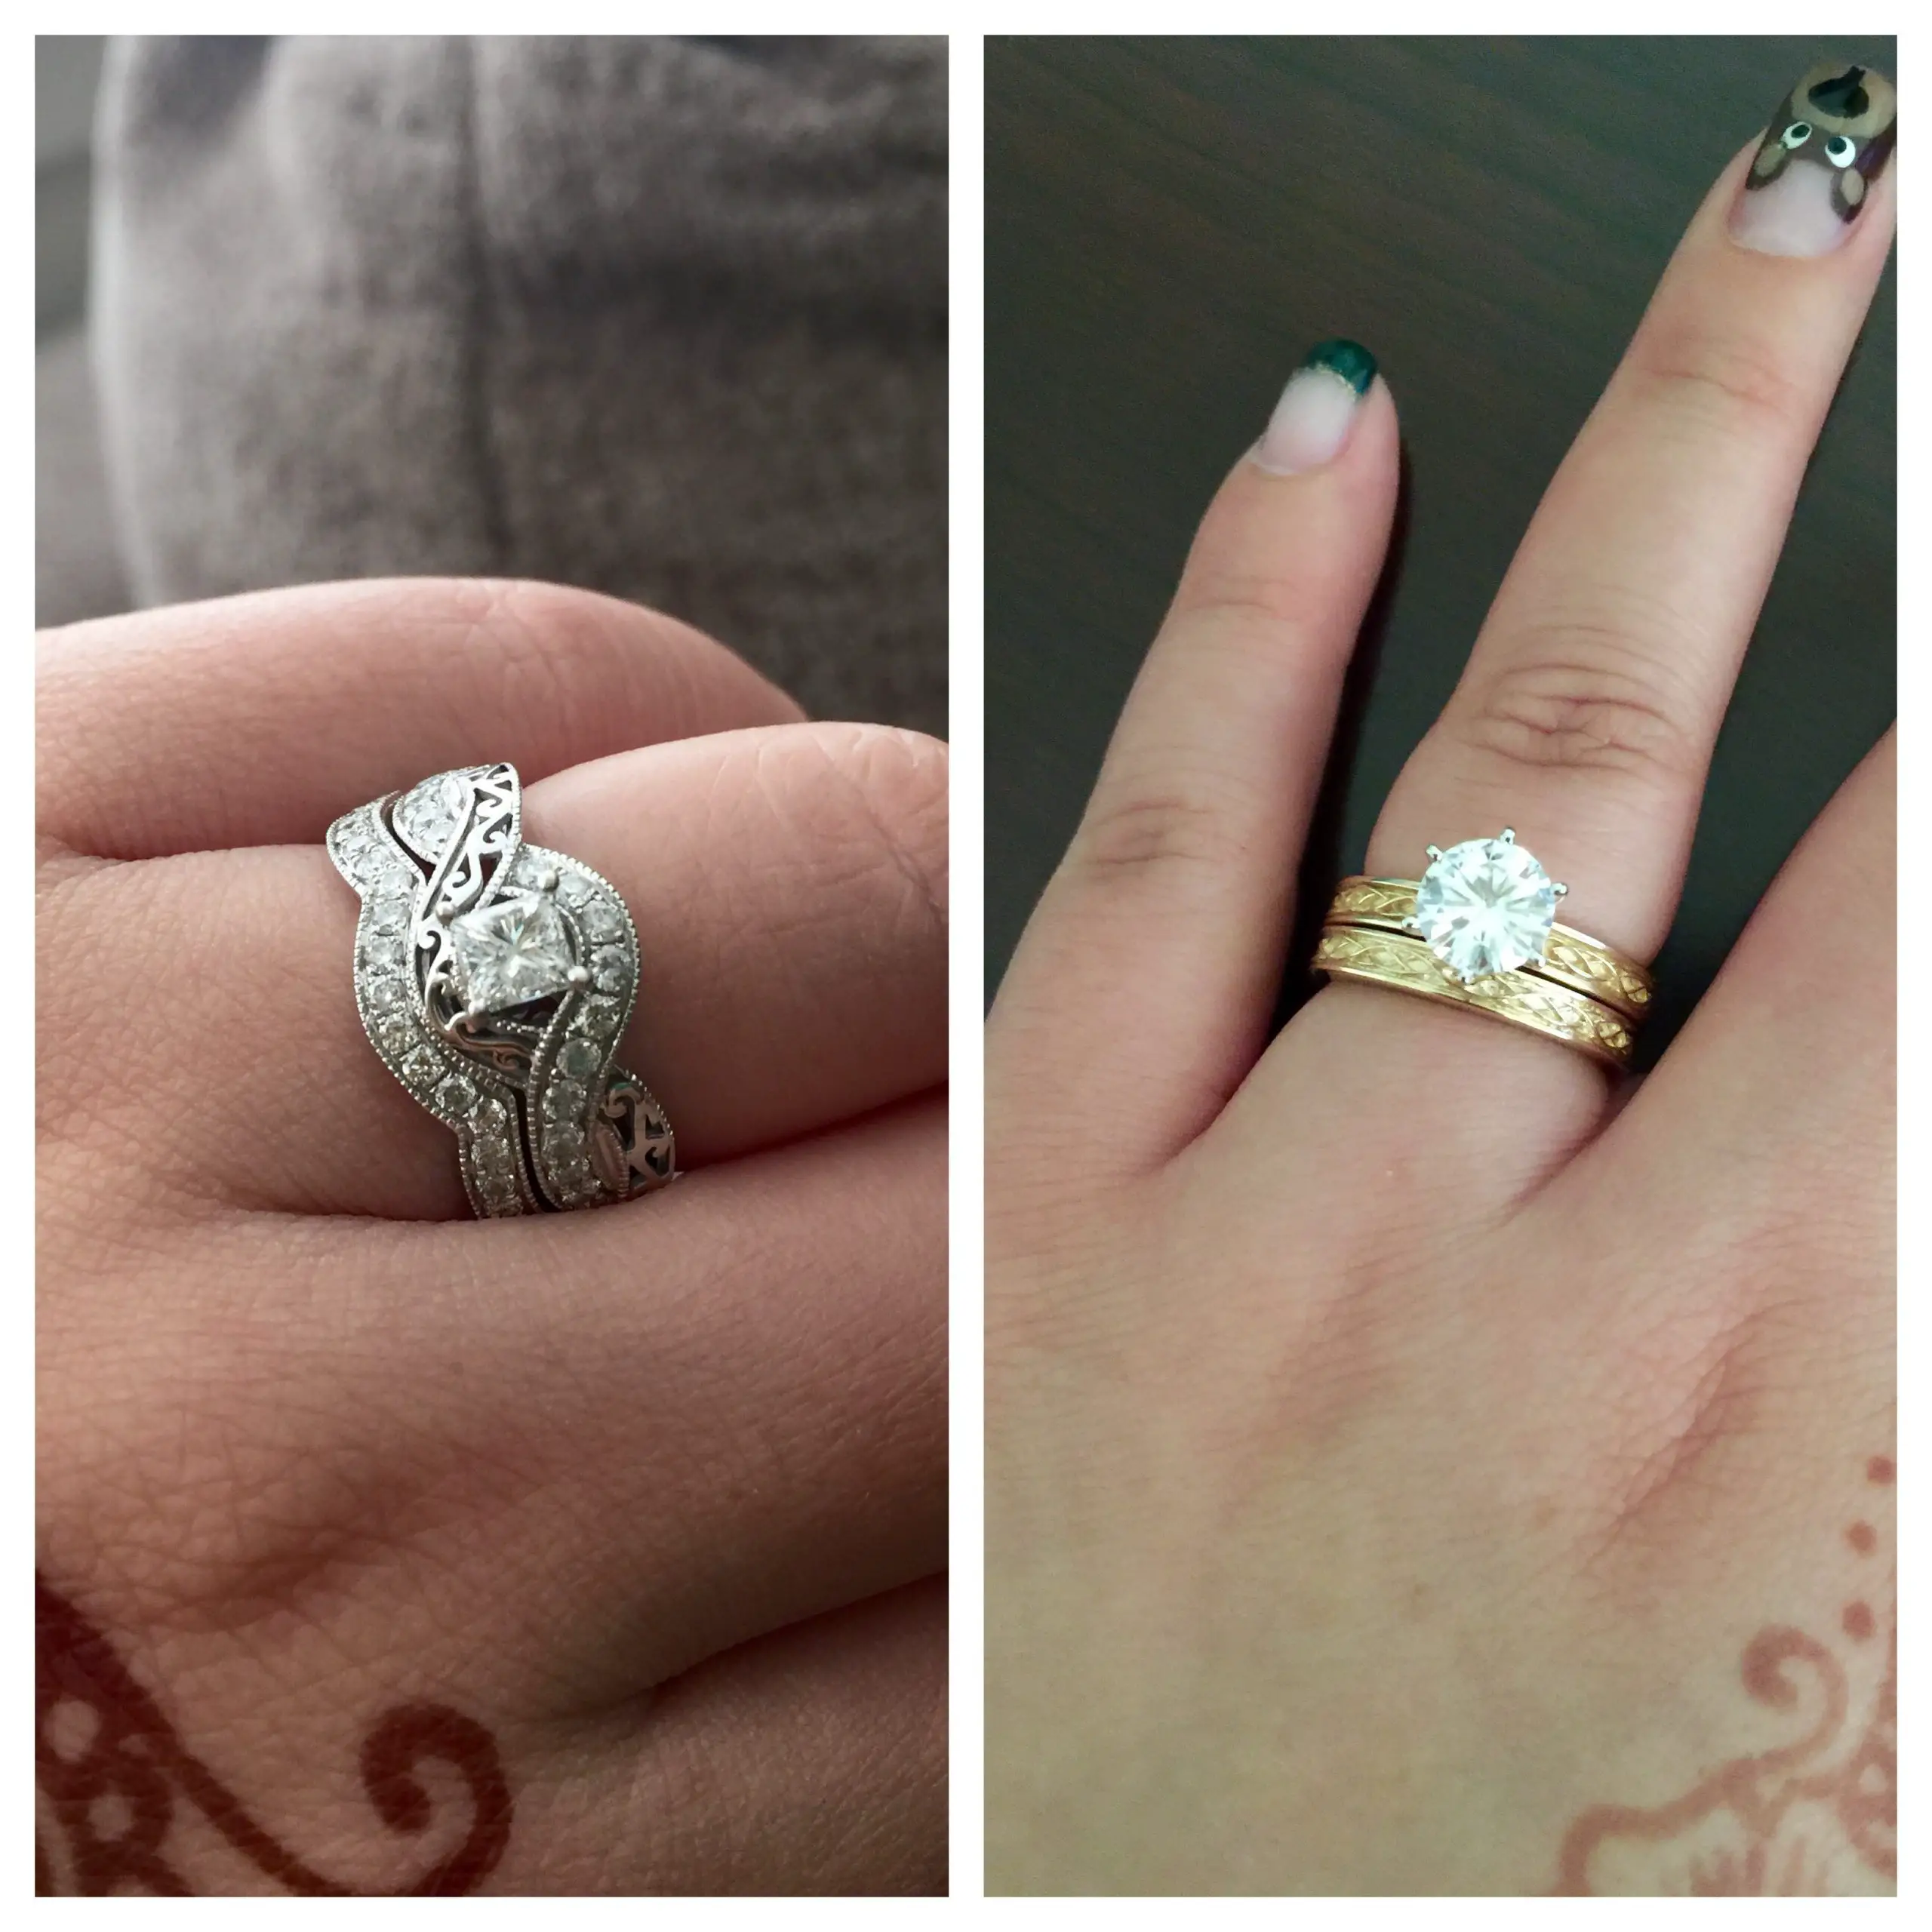 How should I wear my two engagement rings (wedding sets) during the ...